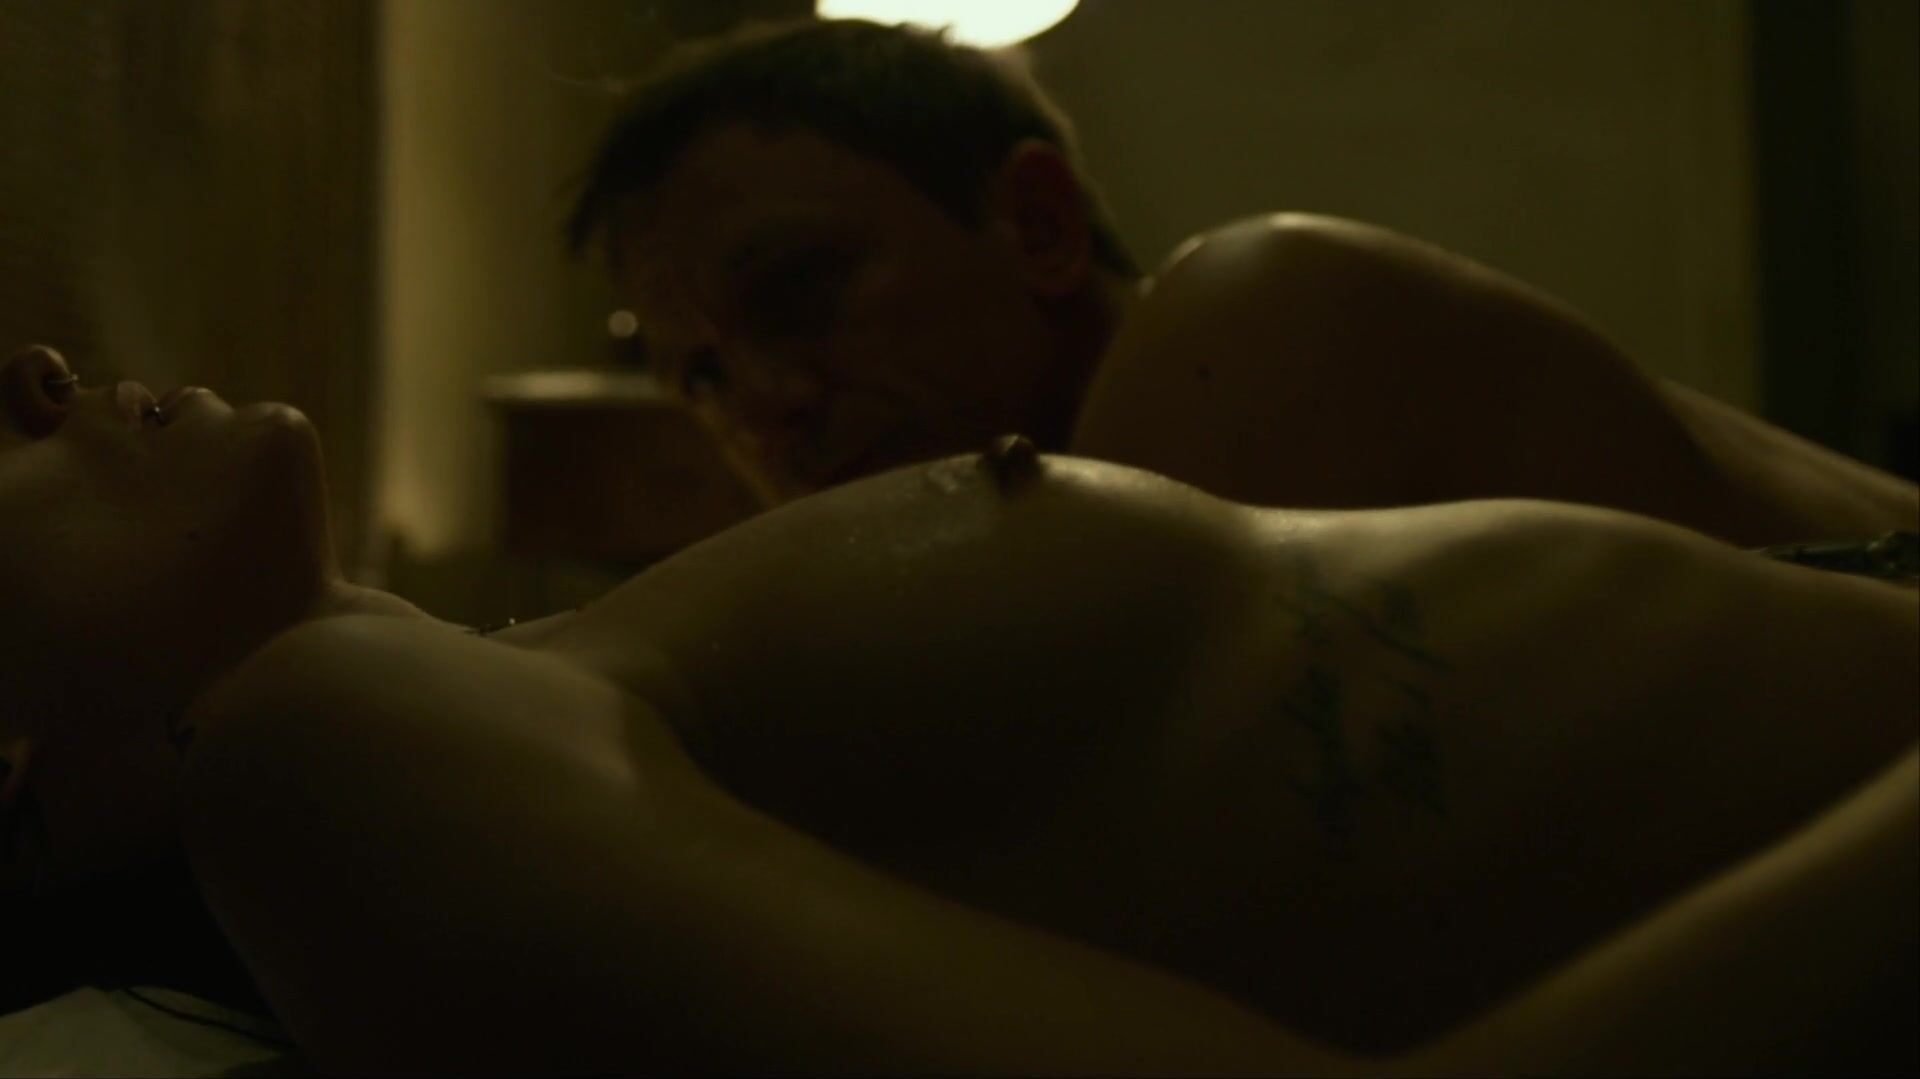 Submission Men hump Rooney Mara with her consent or without it in Girl With The Dragon Tattoo JockerTube